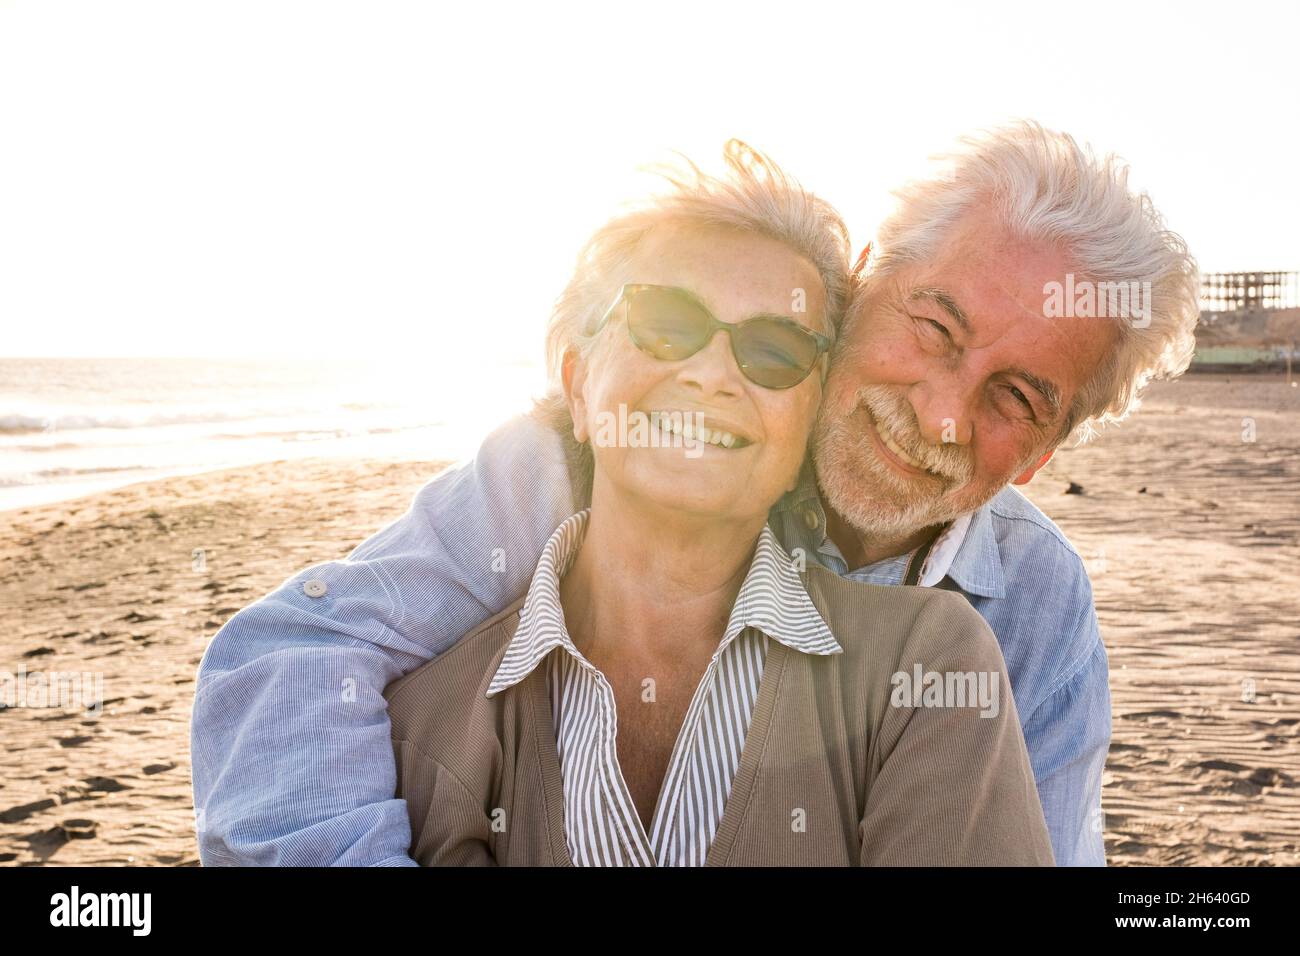 portrait of couple of mature and old people enjoying summer at the beach looking to the camera smiling and having fun together with the sunset at the background. two active seniors traveling outdoors. Stock Photo